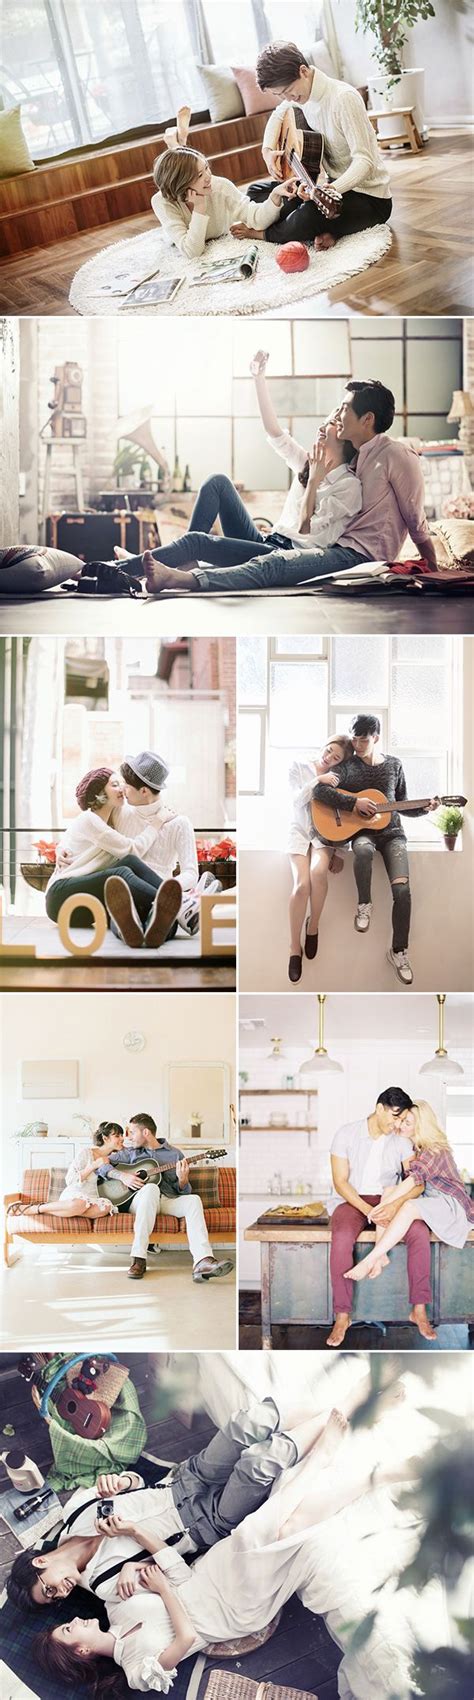 A Sweet Date 25 Cute And Romantic Engagement Photo Ideas Praise